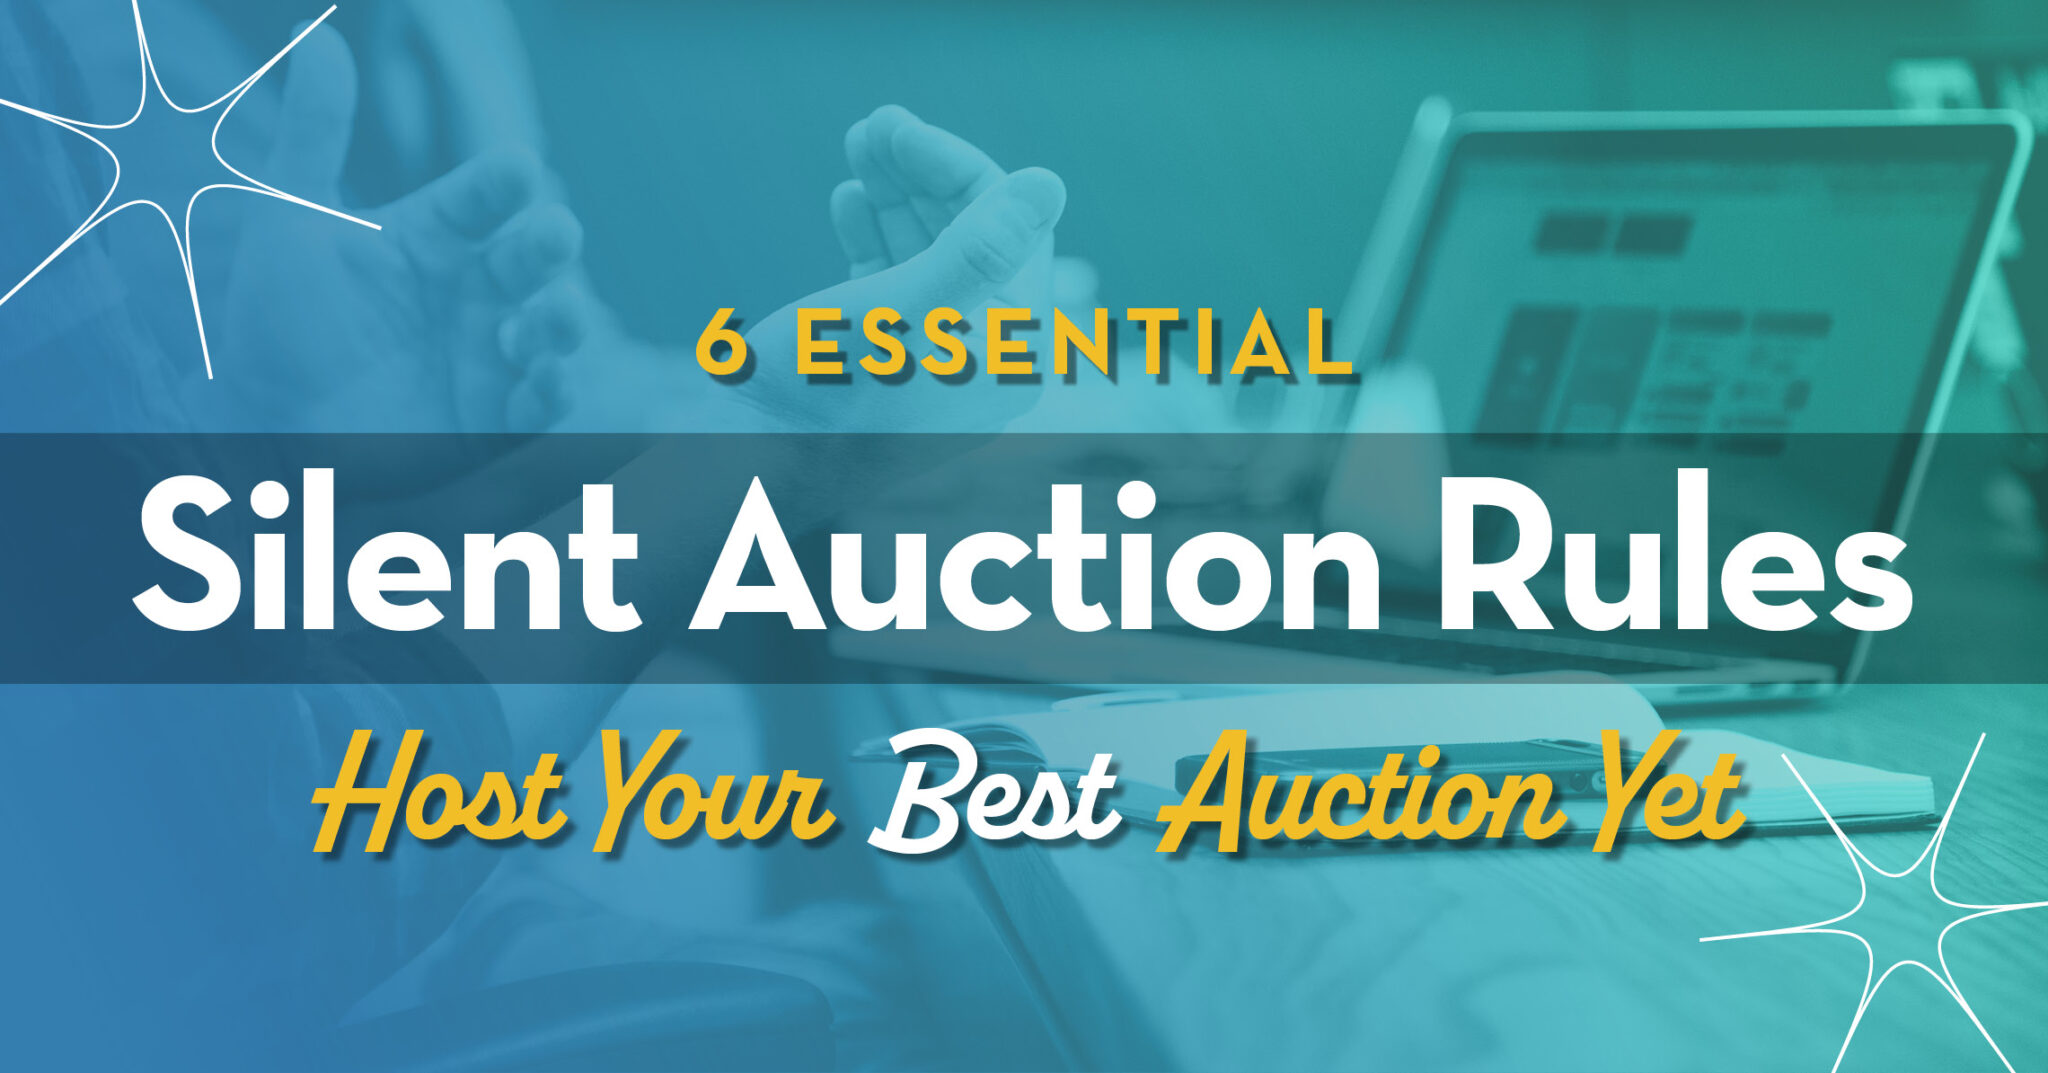 Essential Silent Auction Rules